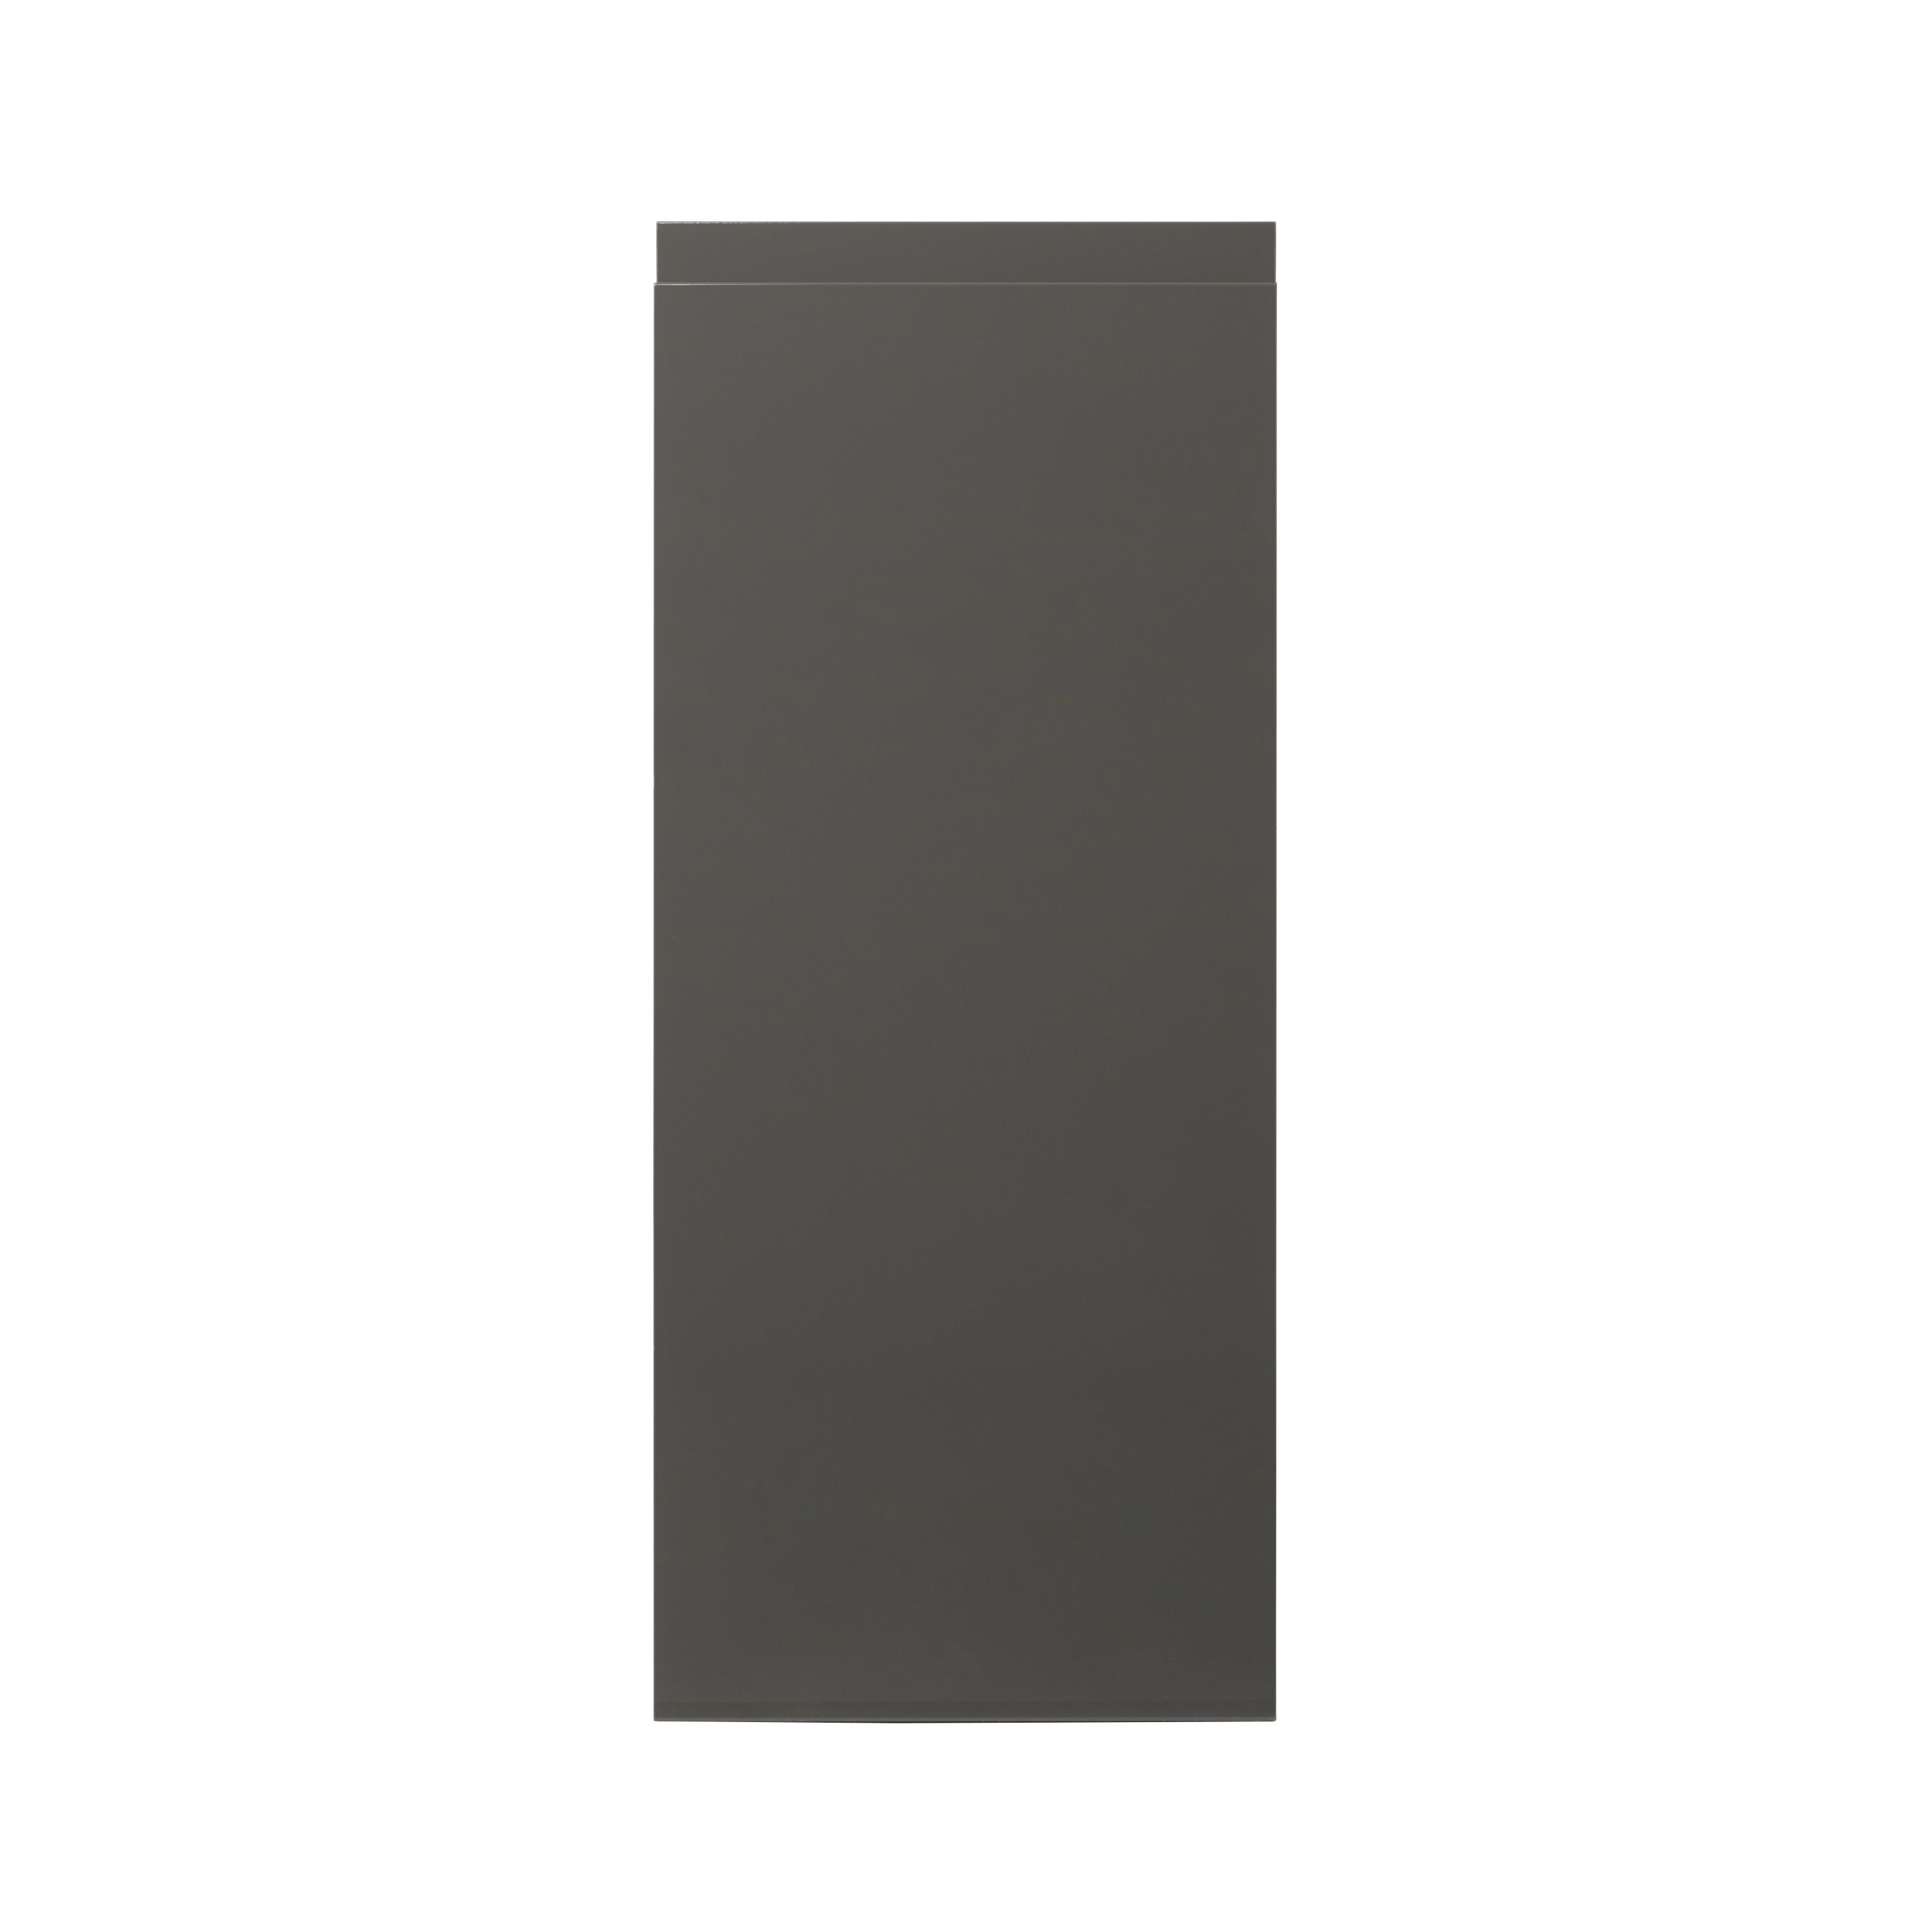 GoodHome Garcinia Gloss anthracite integrated handle Highline Cabinet door (W)300mm (H)715mm (T)19mm